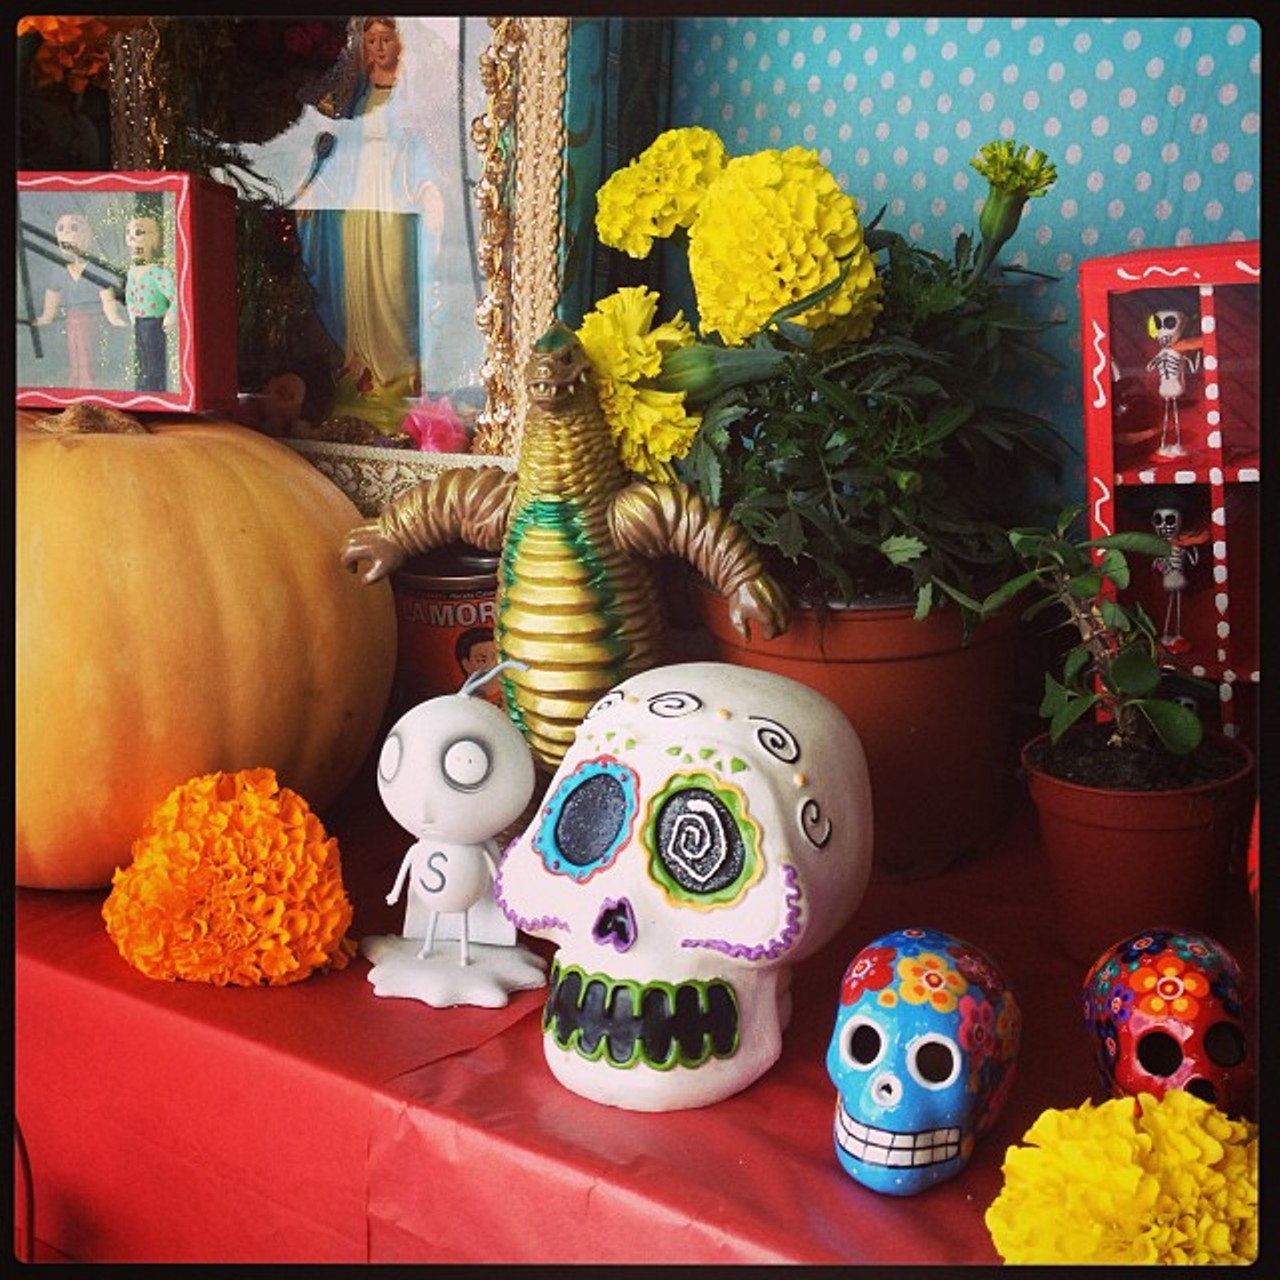 Though it might not sound like it, the Detroit Shoreway's Dia de Los Muertos (Day of the Dead) celebration is a family-friendly affair. Kids love to join the Parade of Skeletons that features life-sized puppets and plenty of people in costume. Vendors will set up inside Cleveland Public Theatre's Parish Hall and Gordon Square Arts District bars and restaurants will have specials. Now in its ninth year, the event kicks off at 11 a.m., and the parade starts at 3:30 p.m. Admission is free. (Niesel)